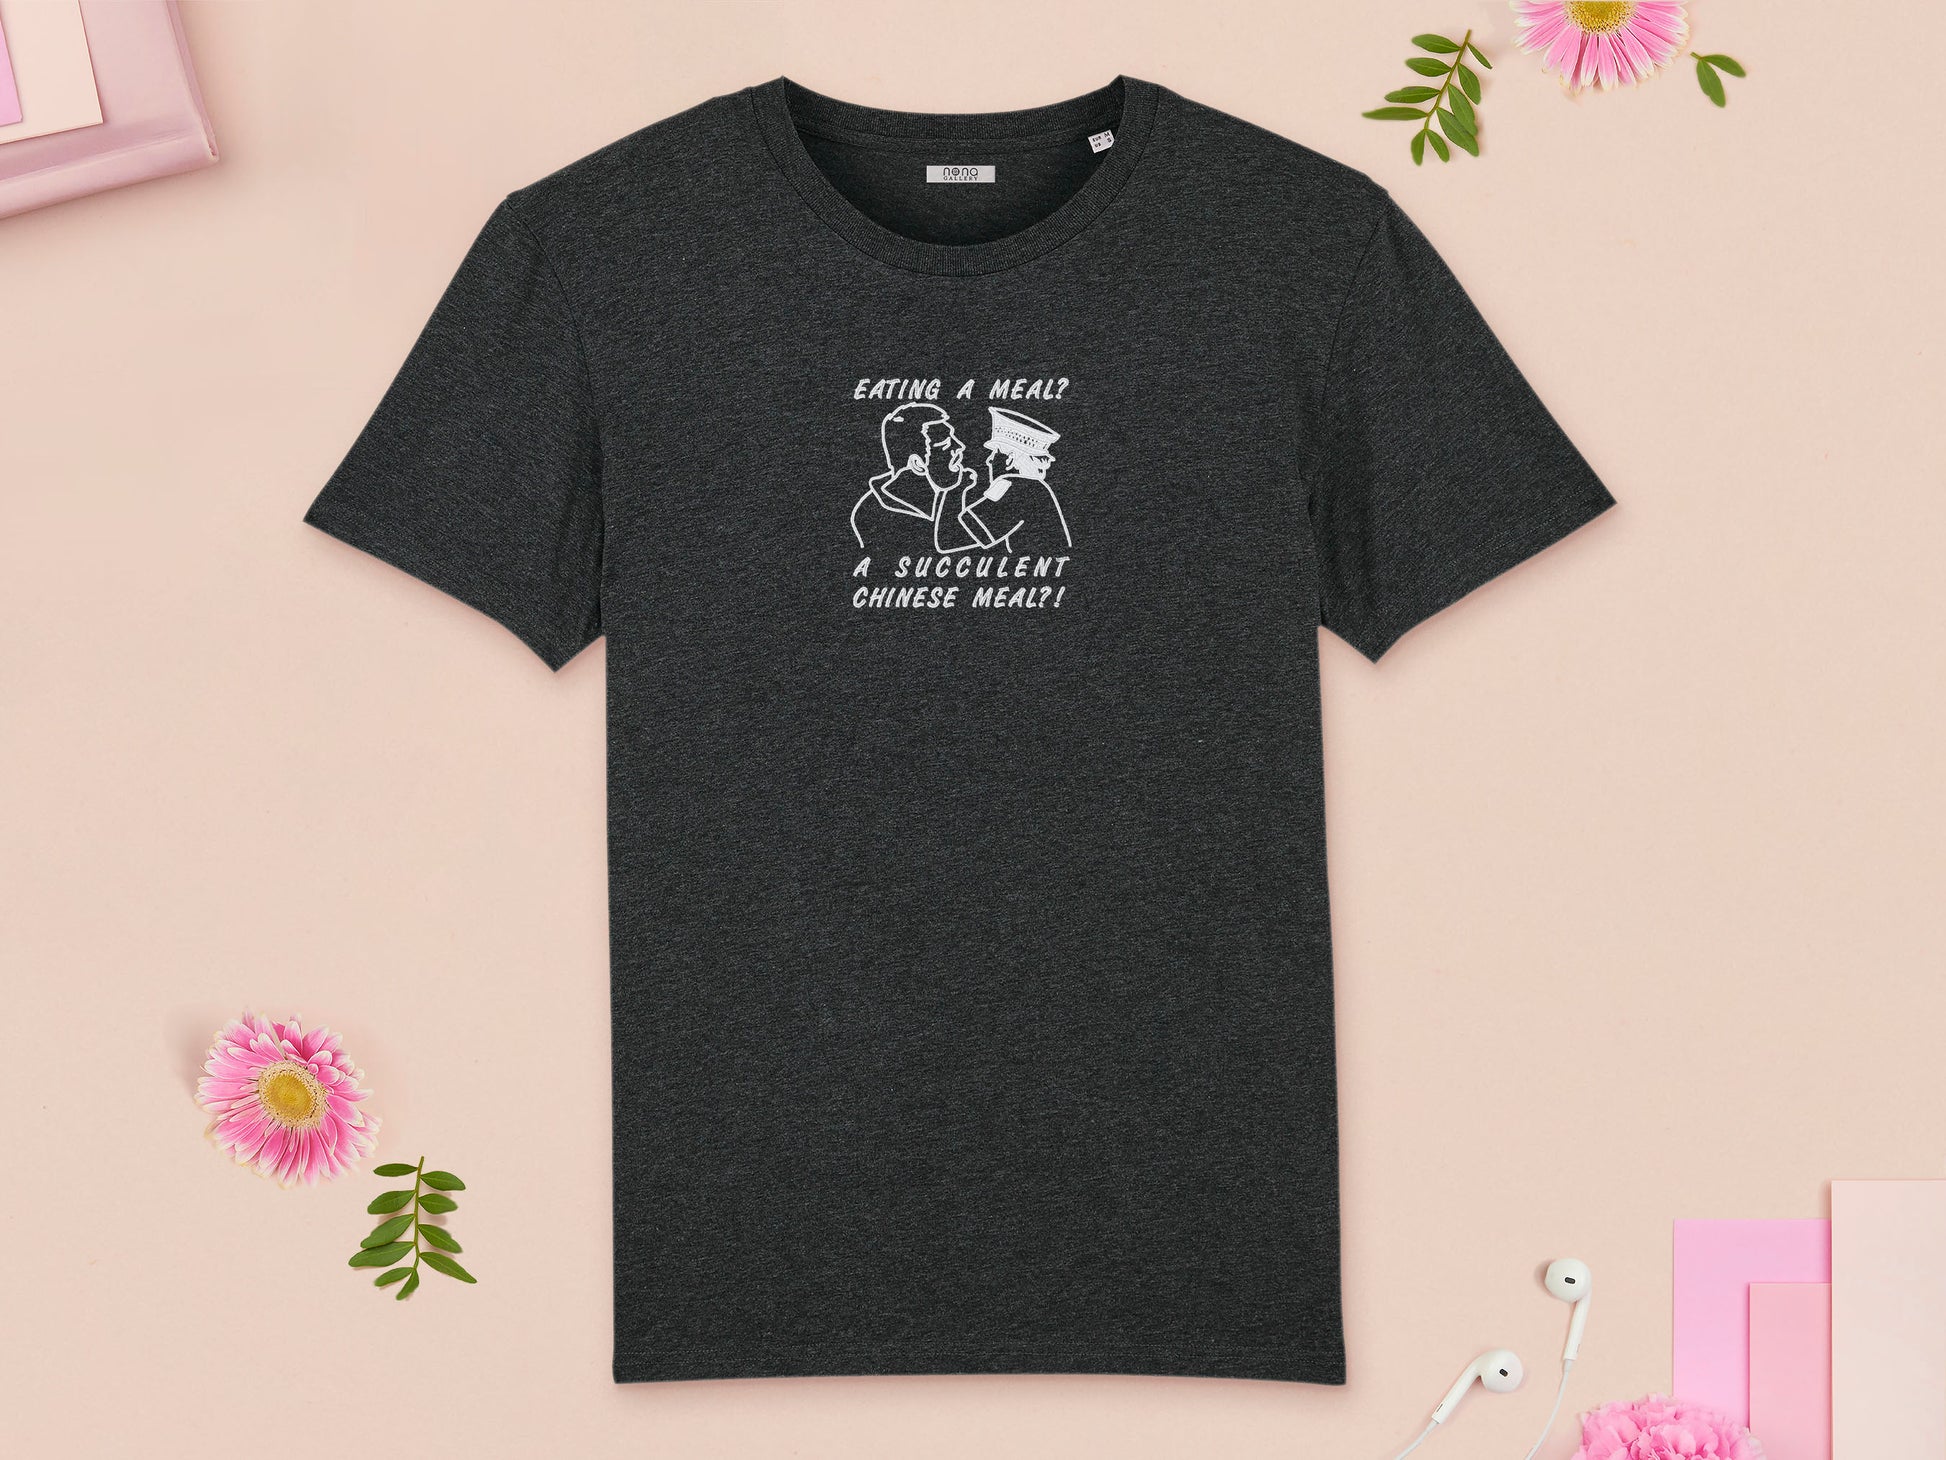 A grey crew neck short sleeve t-shirt, with an embroidered white thread design of the viral democracy manifest video of Charles Dozsa being arrested by a policeman with the text reading Eating A Meal? A Succulent Chinese Meal?!